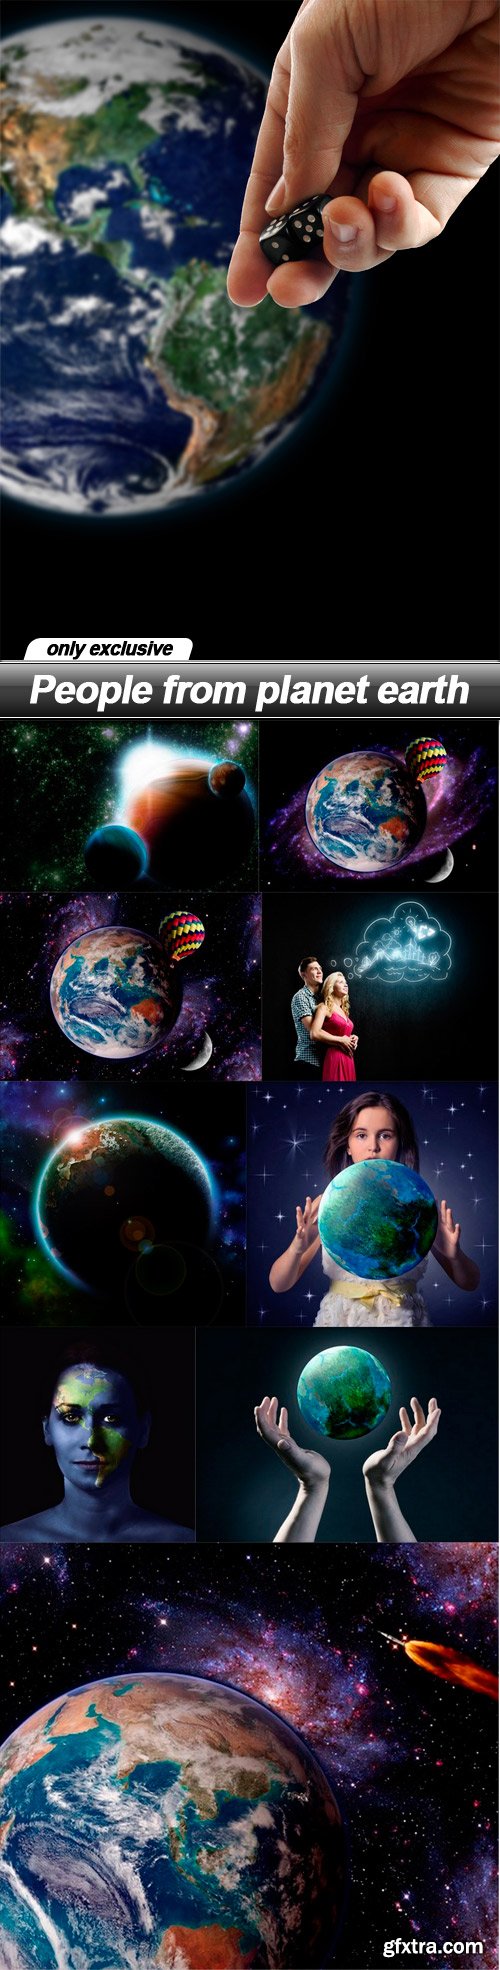 People from planet earth - 10 UHQ JPEG